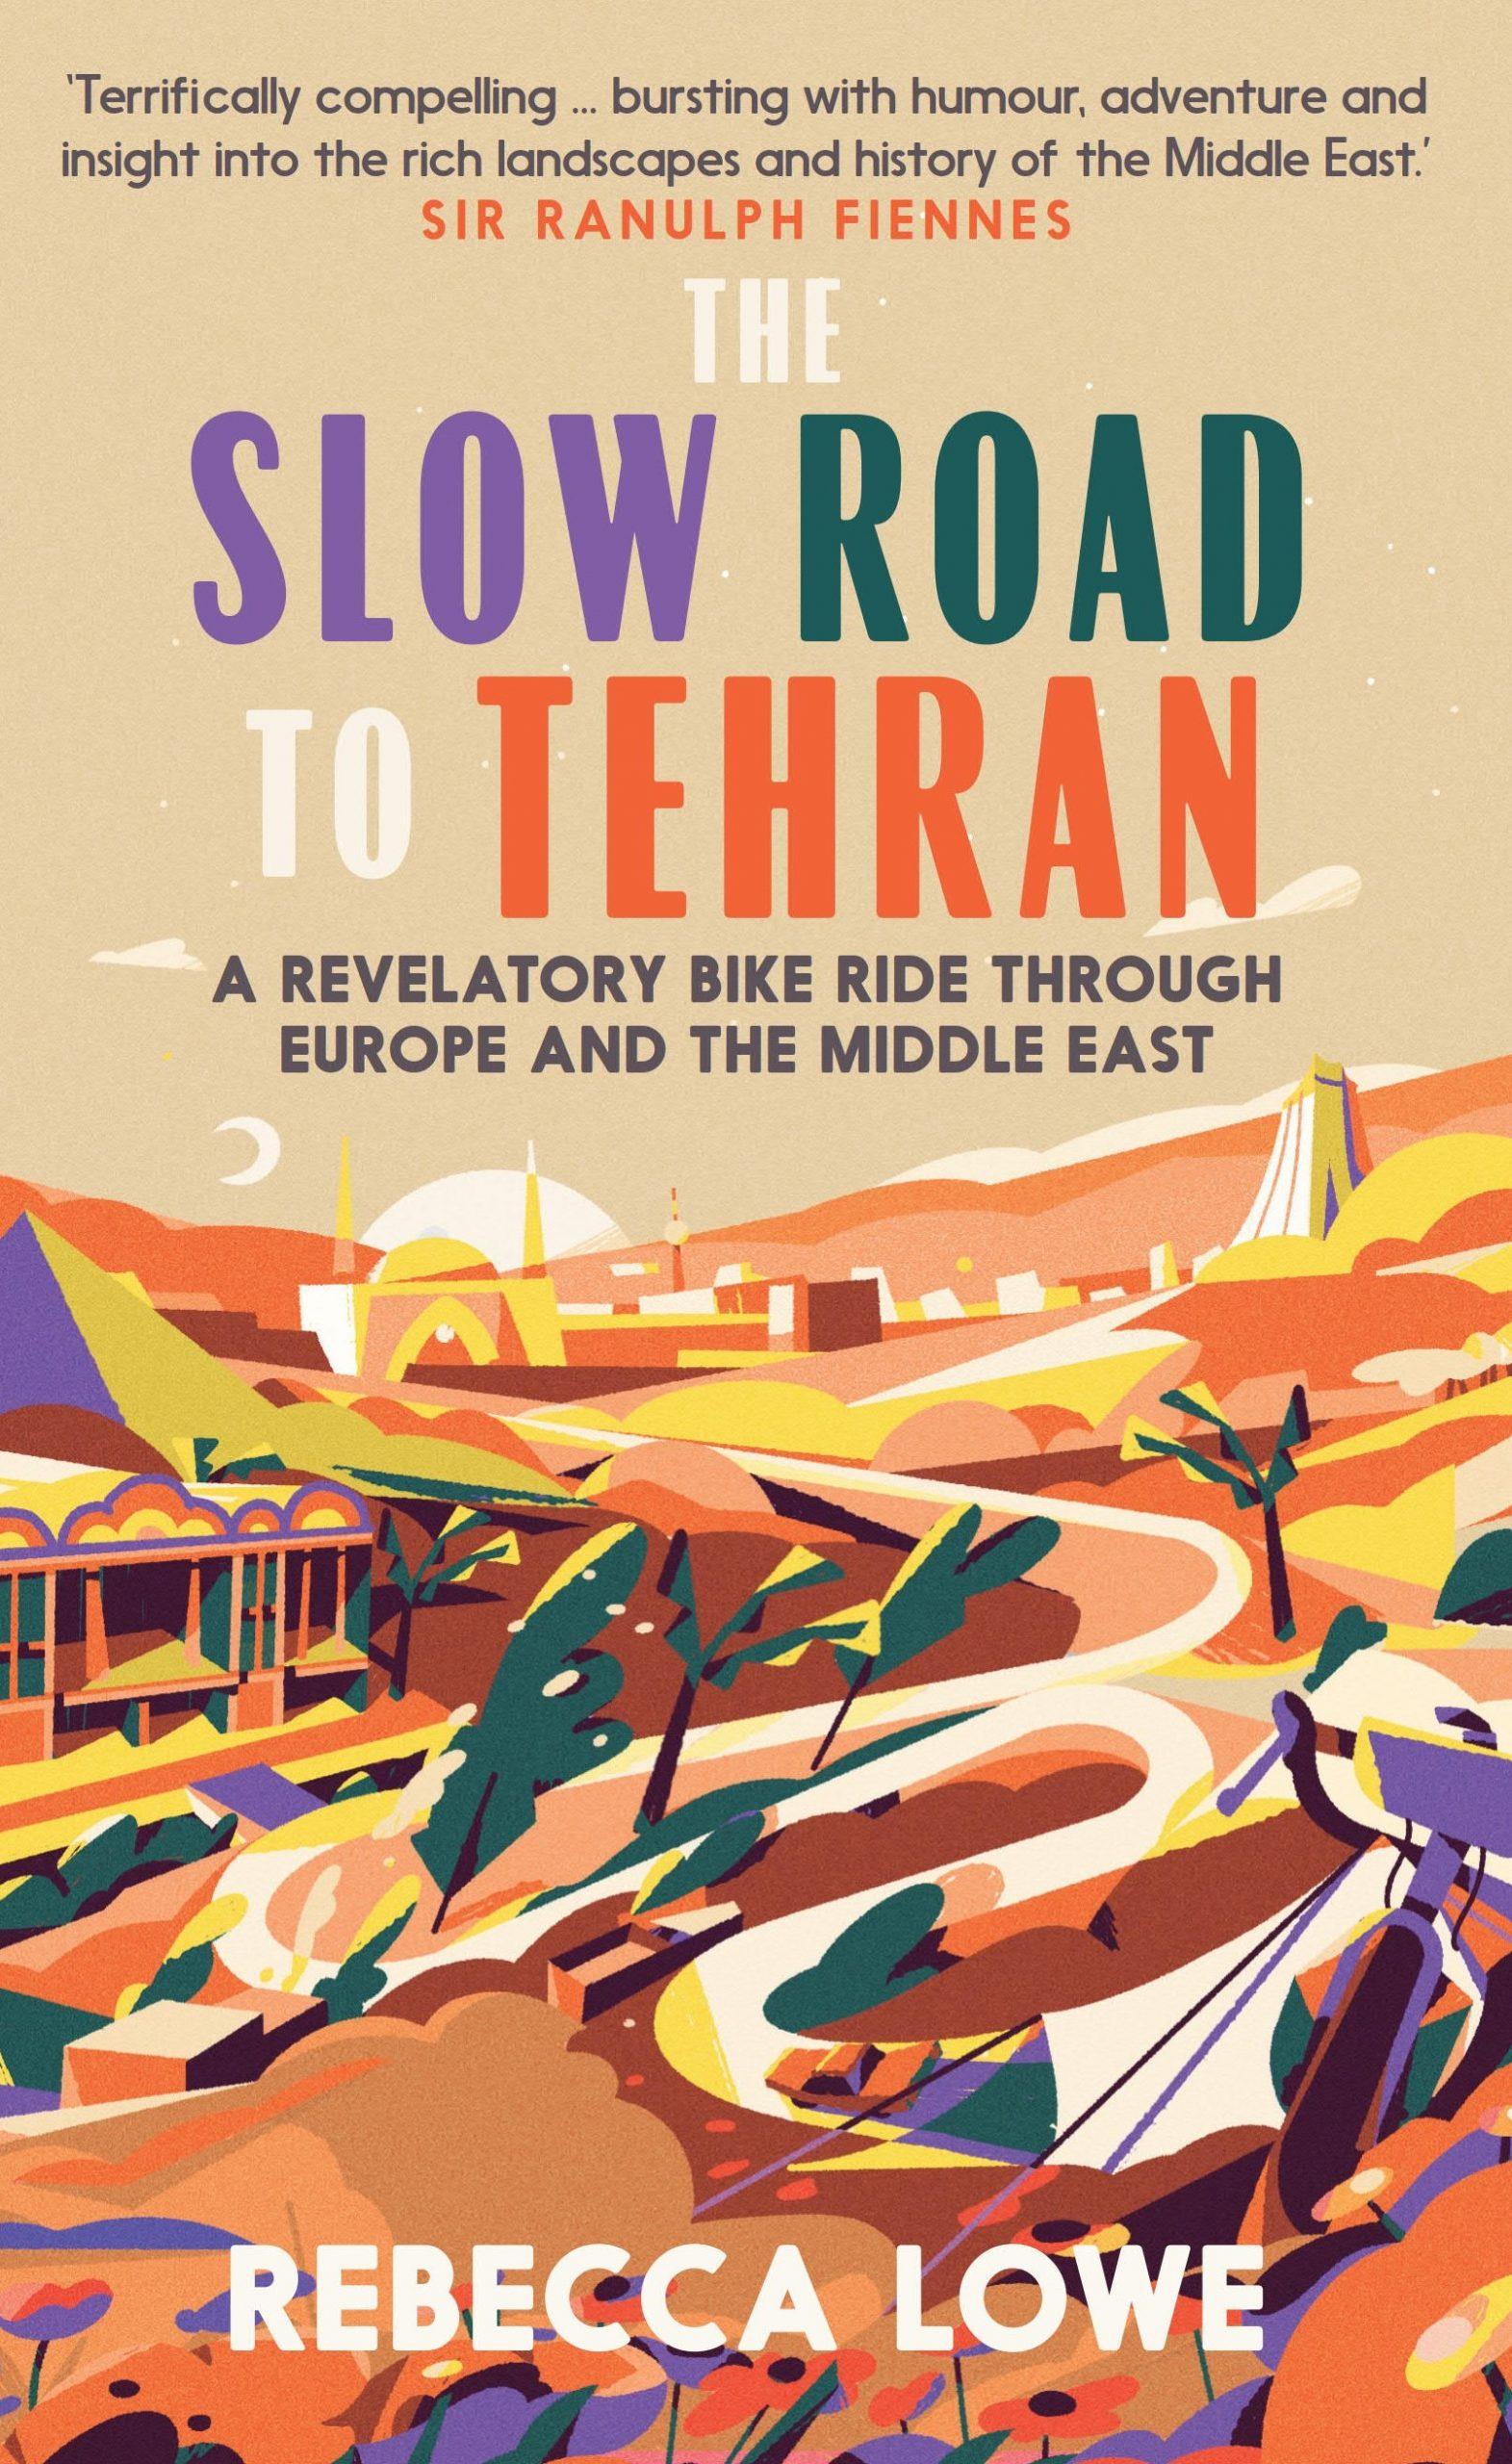 A WillCycle book review of The Slow Road To Teheran, by Rebecca Lowe